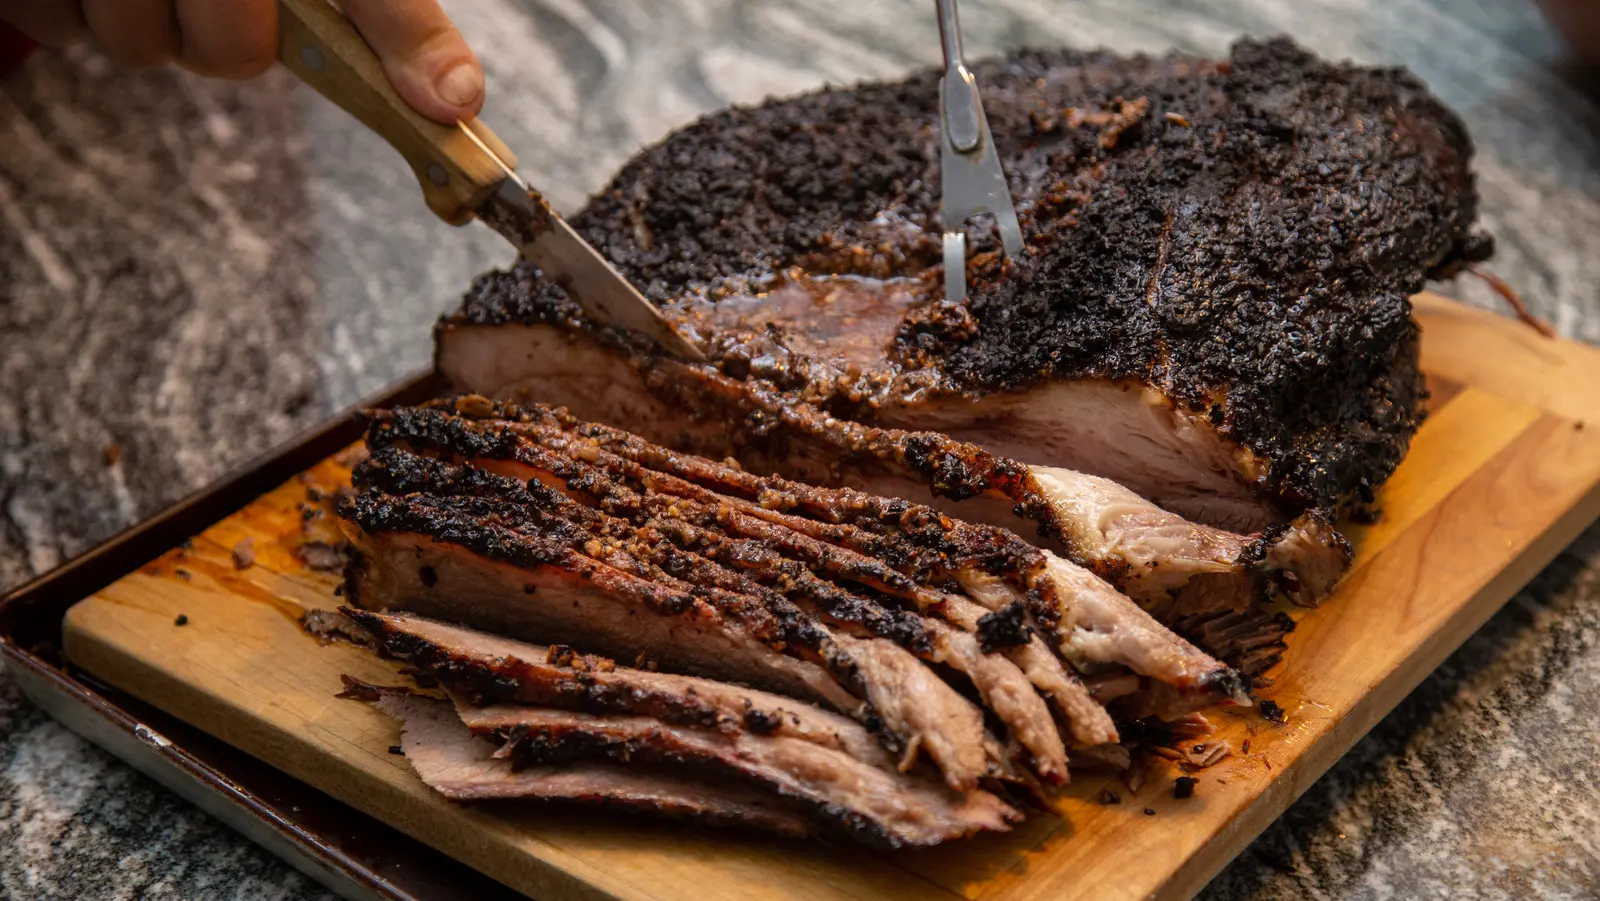 how long does smoked brisket last - How do you keep brisket fresh after smoking